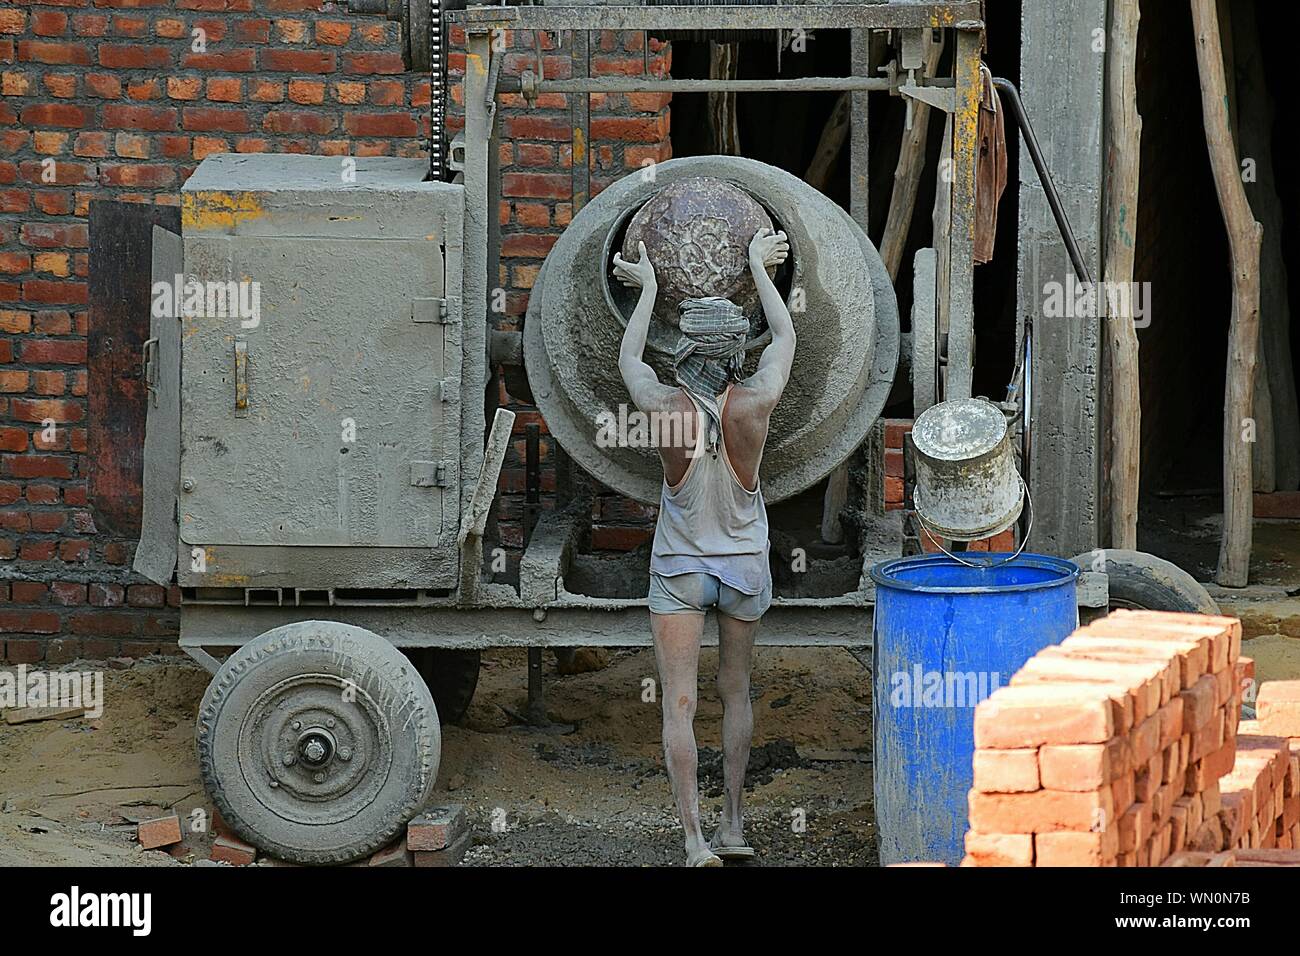 Cement Mixer High Resolution Stock Photography and Images - Alamy